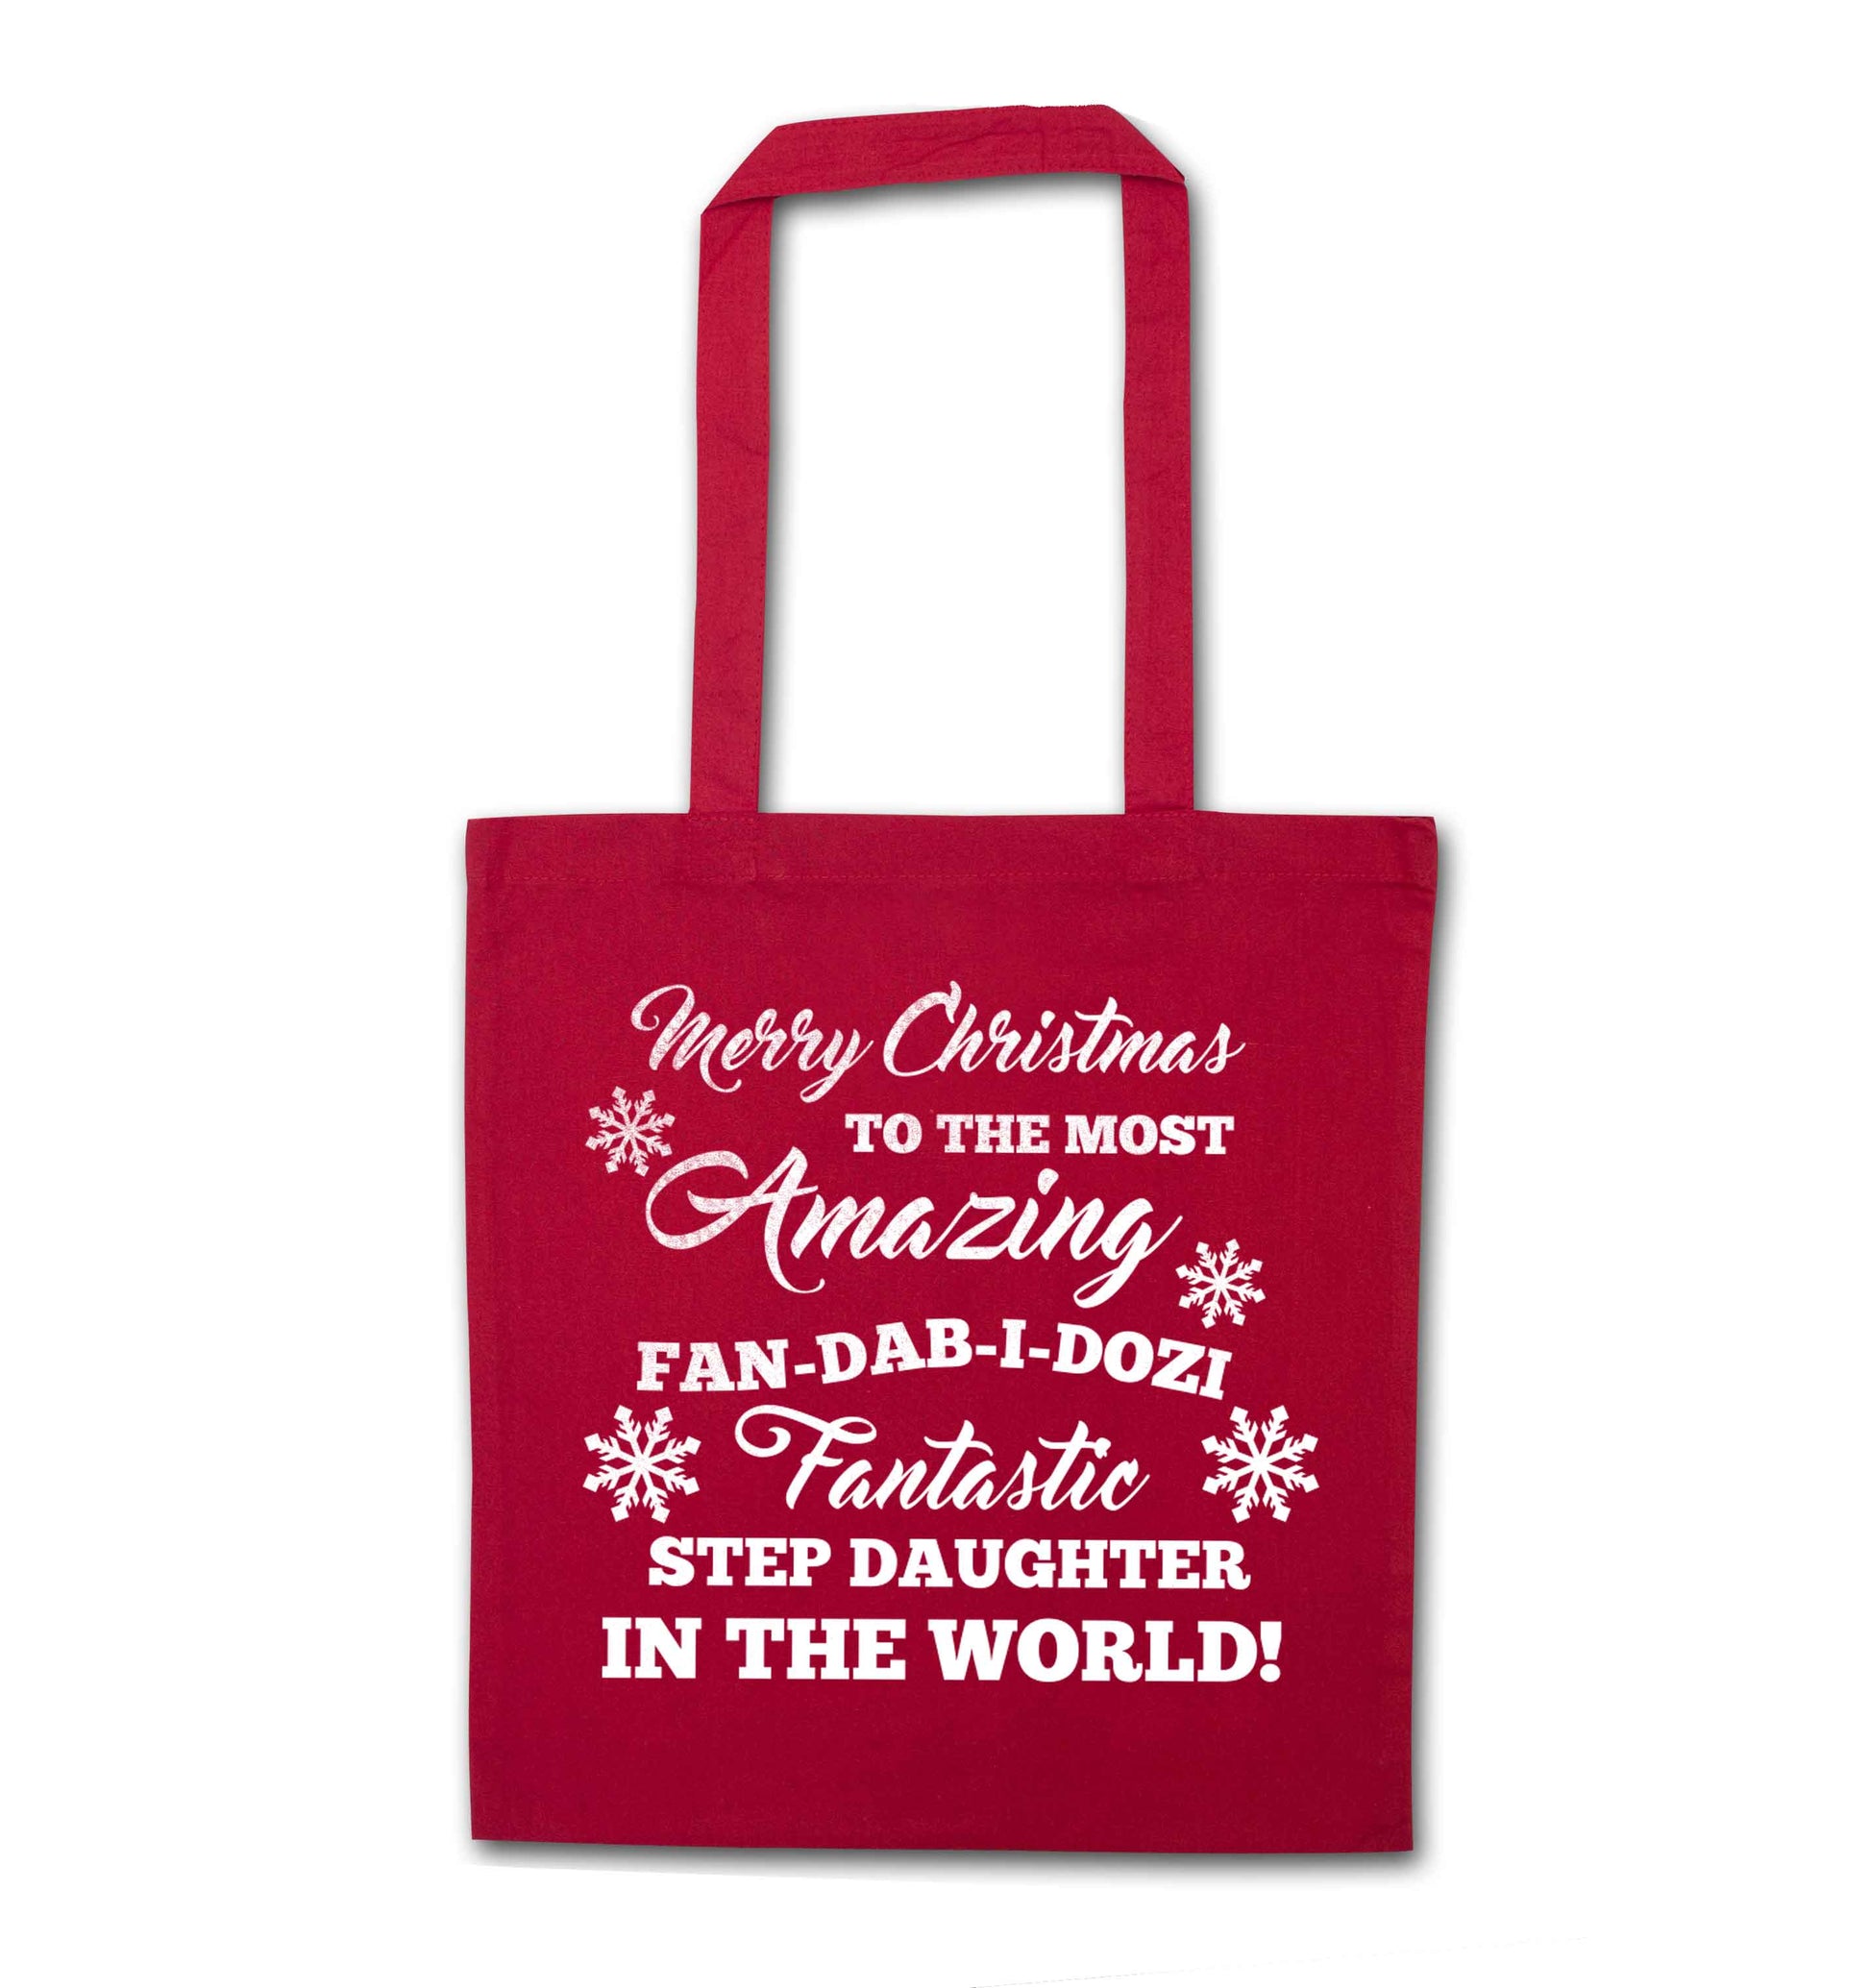 Merry Christmas to the most amazing fan-dab-i-dozi fantasic Step Daughter in the world red tote bag